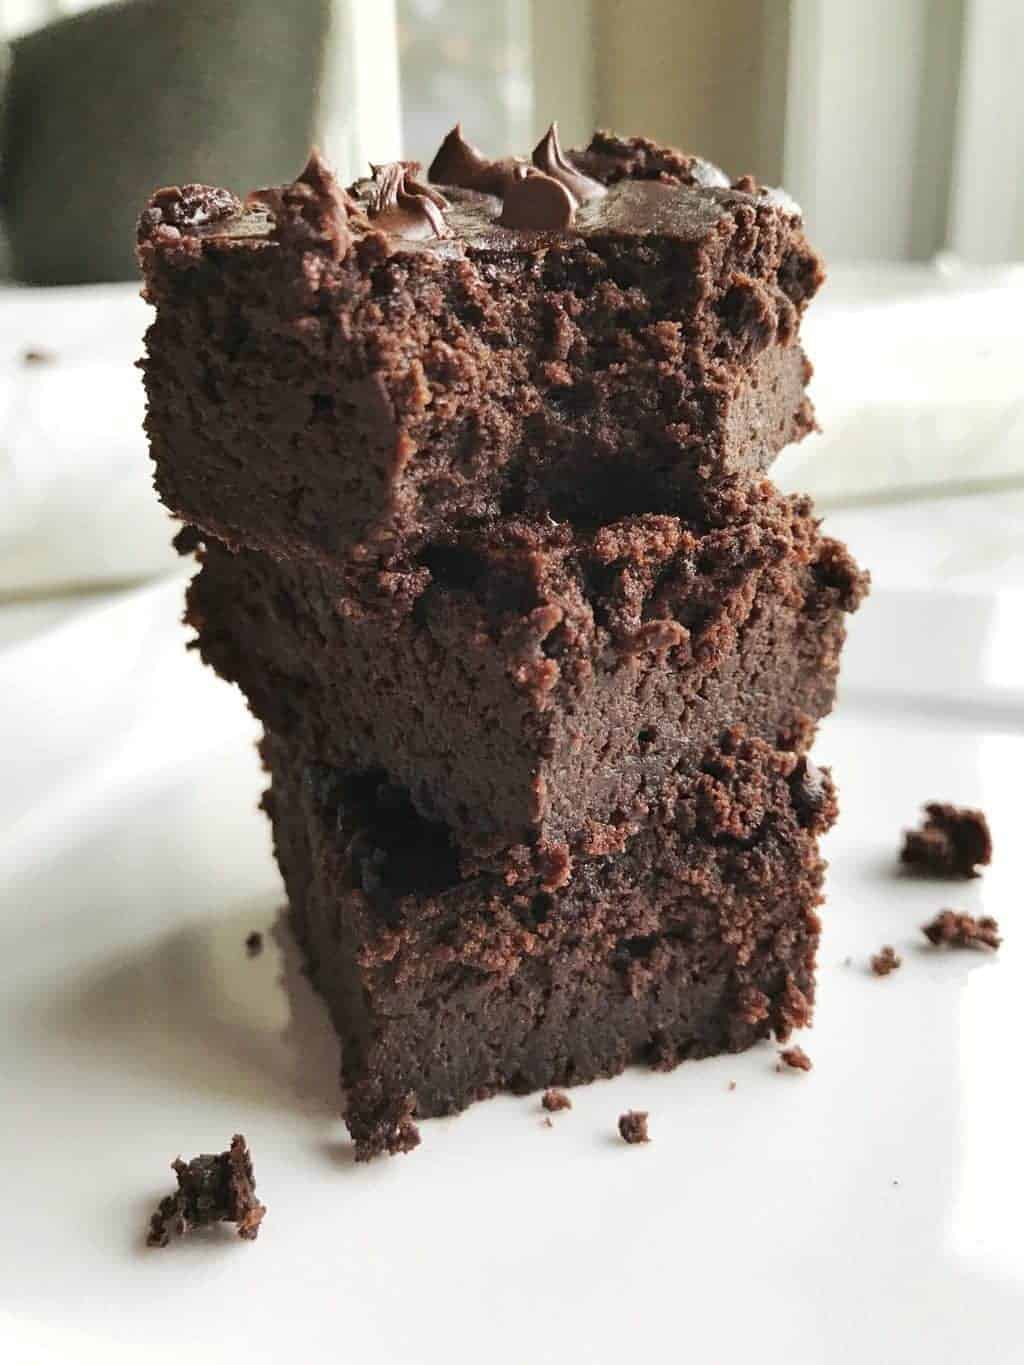 Double Chocolate Brownies are the best black bean brownie recipe you will ever try. These brownies are made in a blender quickly, pureeing the black beans so no one knows they are in there. Simple enough to get your kids cooking. Watch the how to video to see just how easy this homemade brownie recipe is.